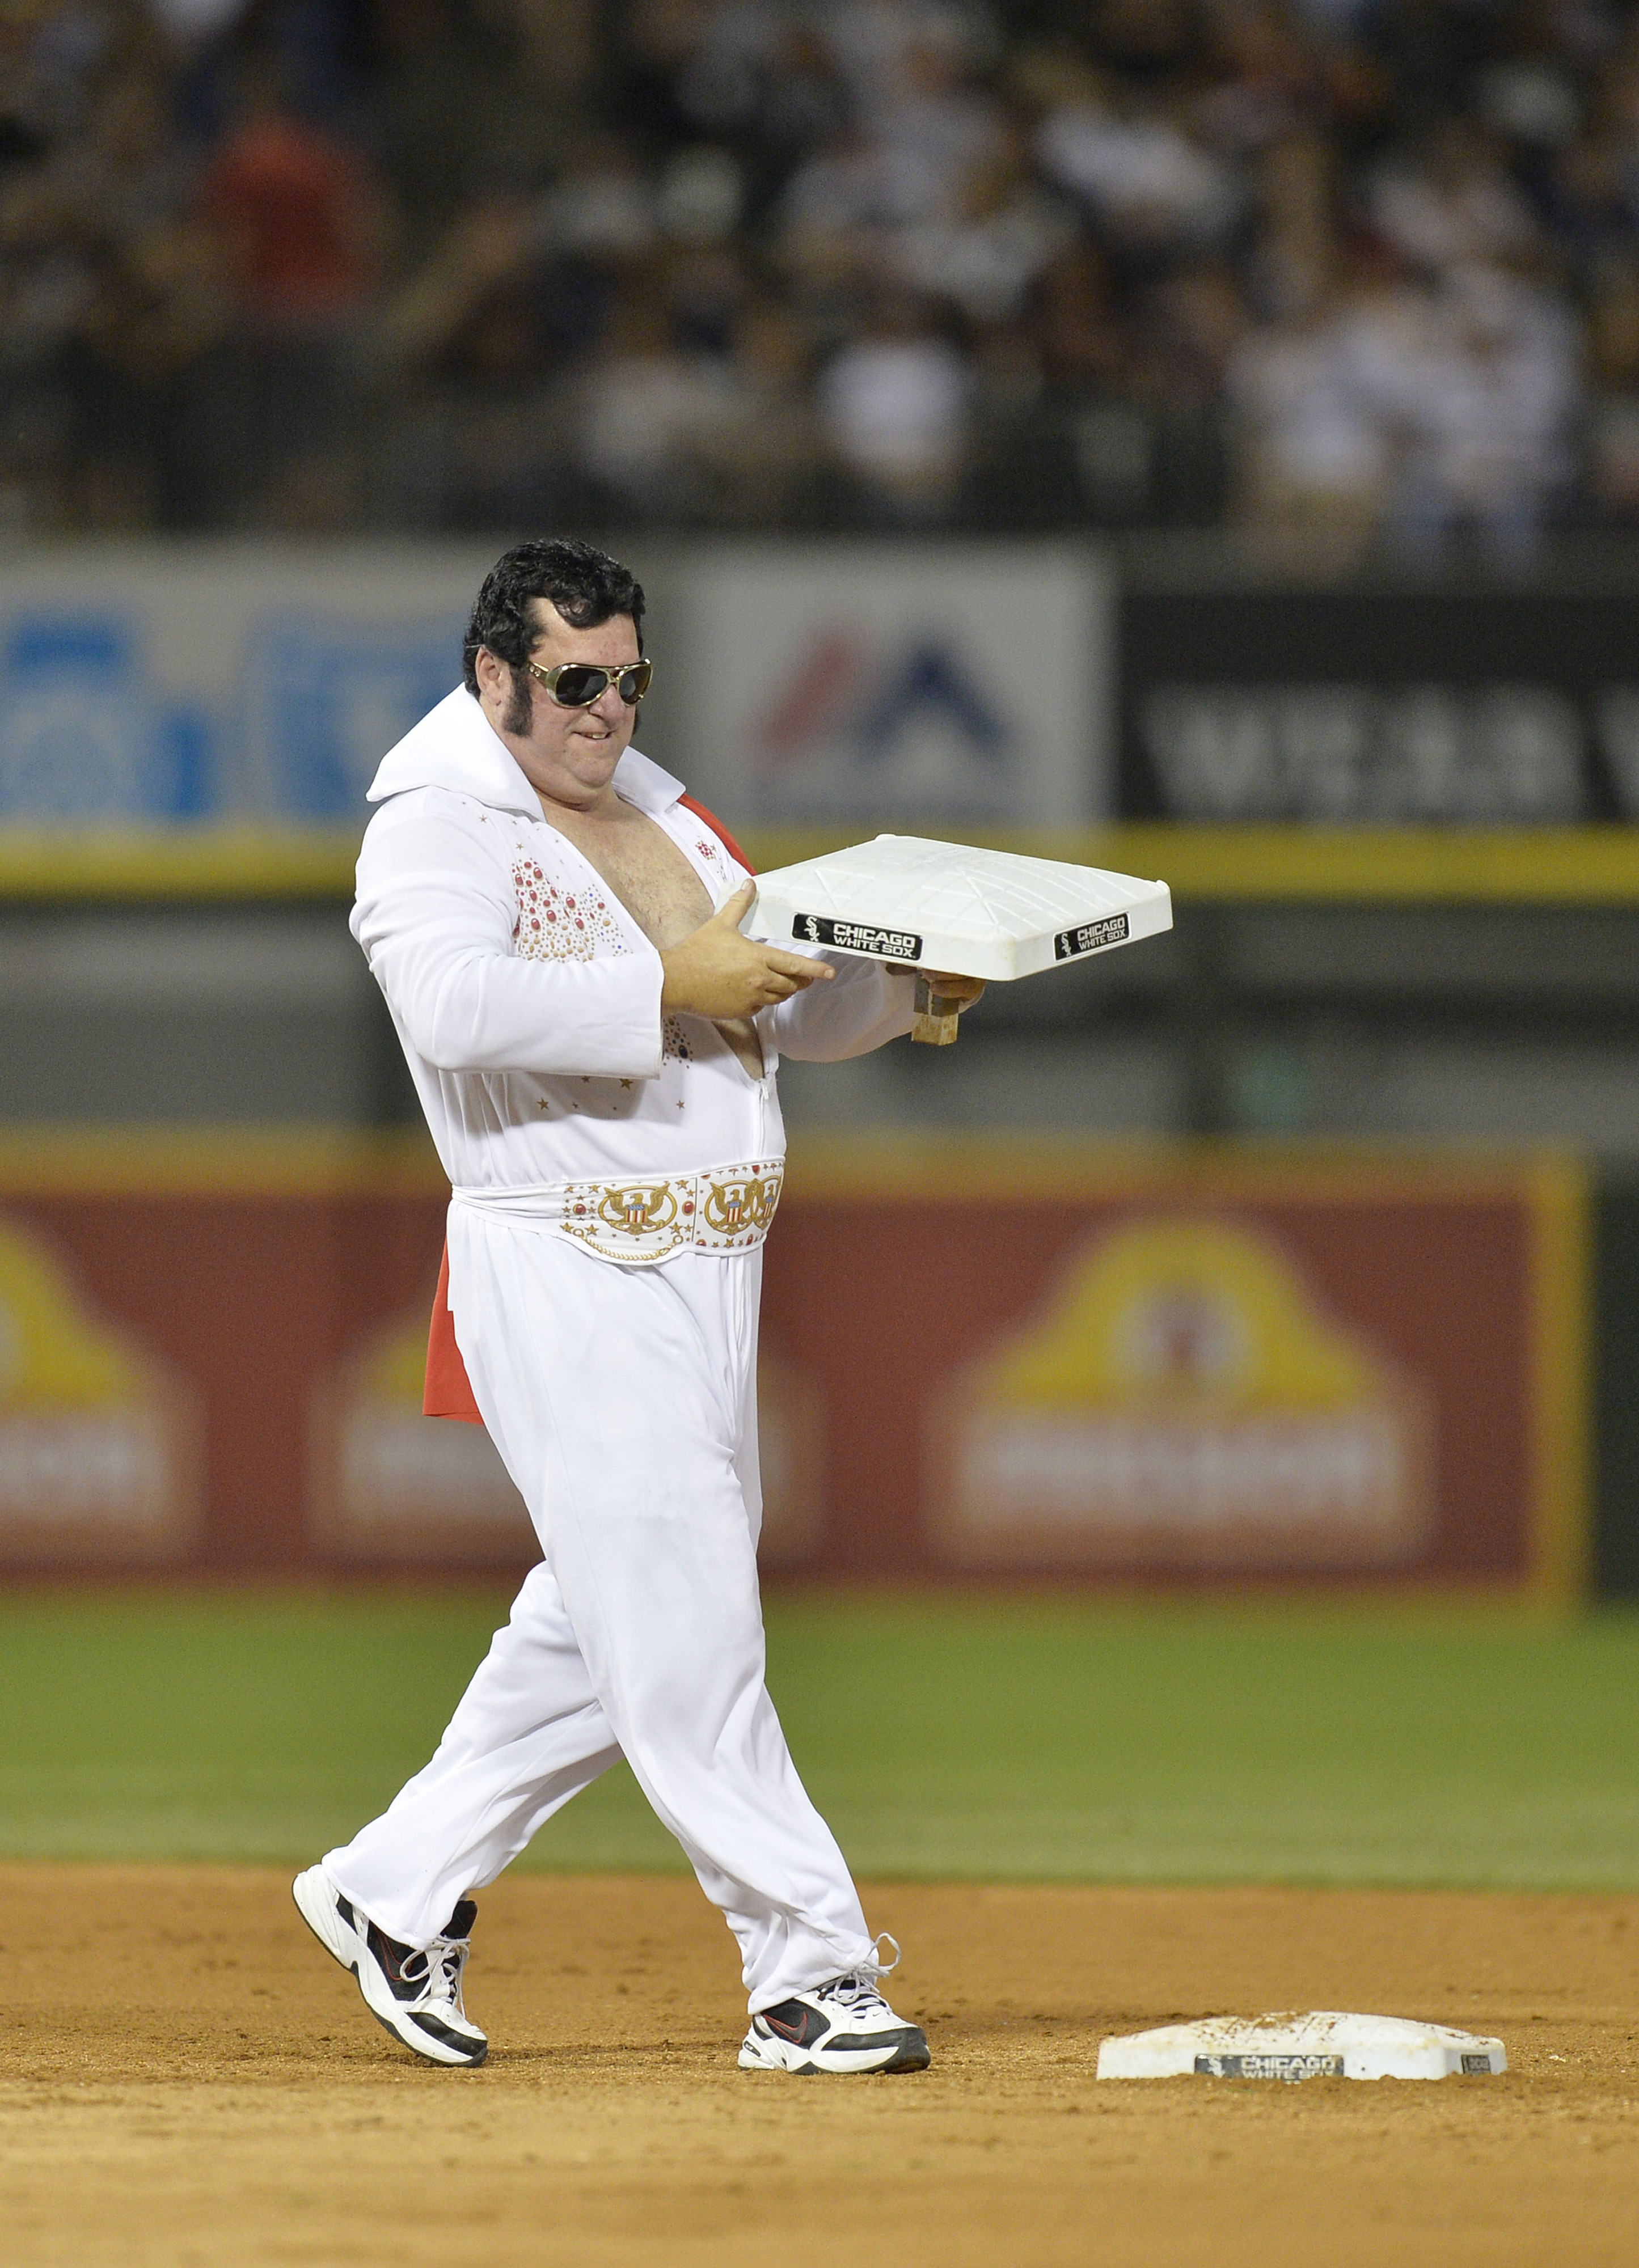 That big contract really changed Elvis